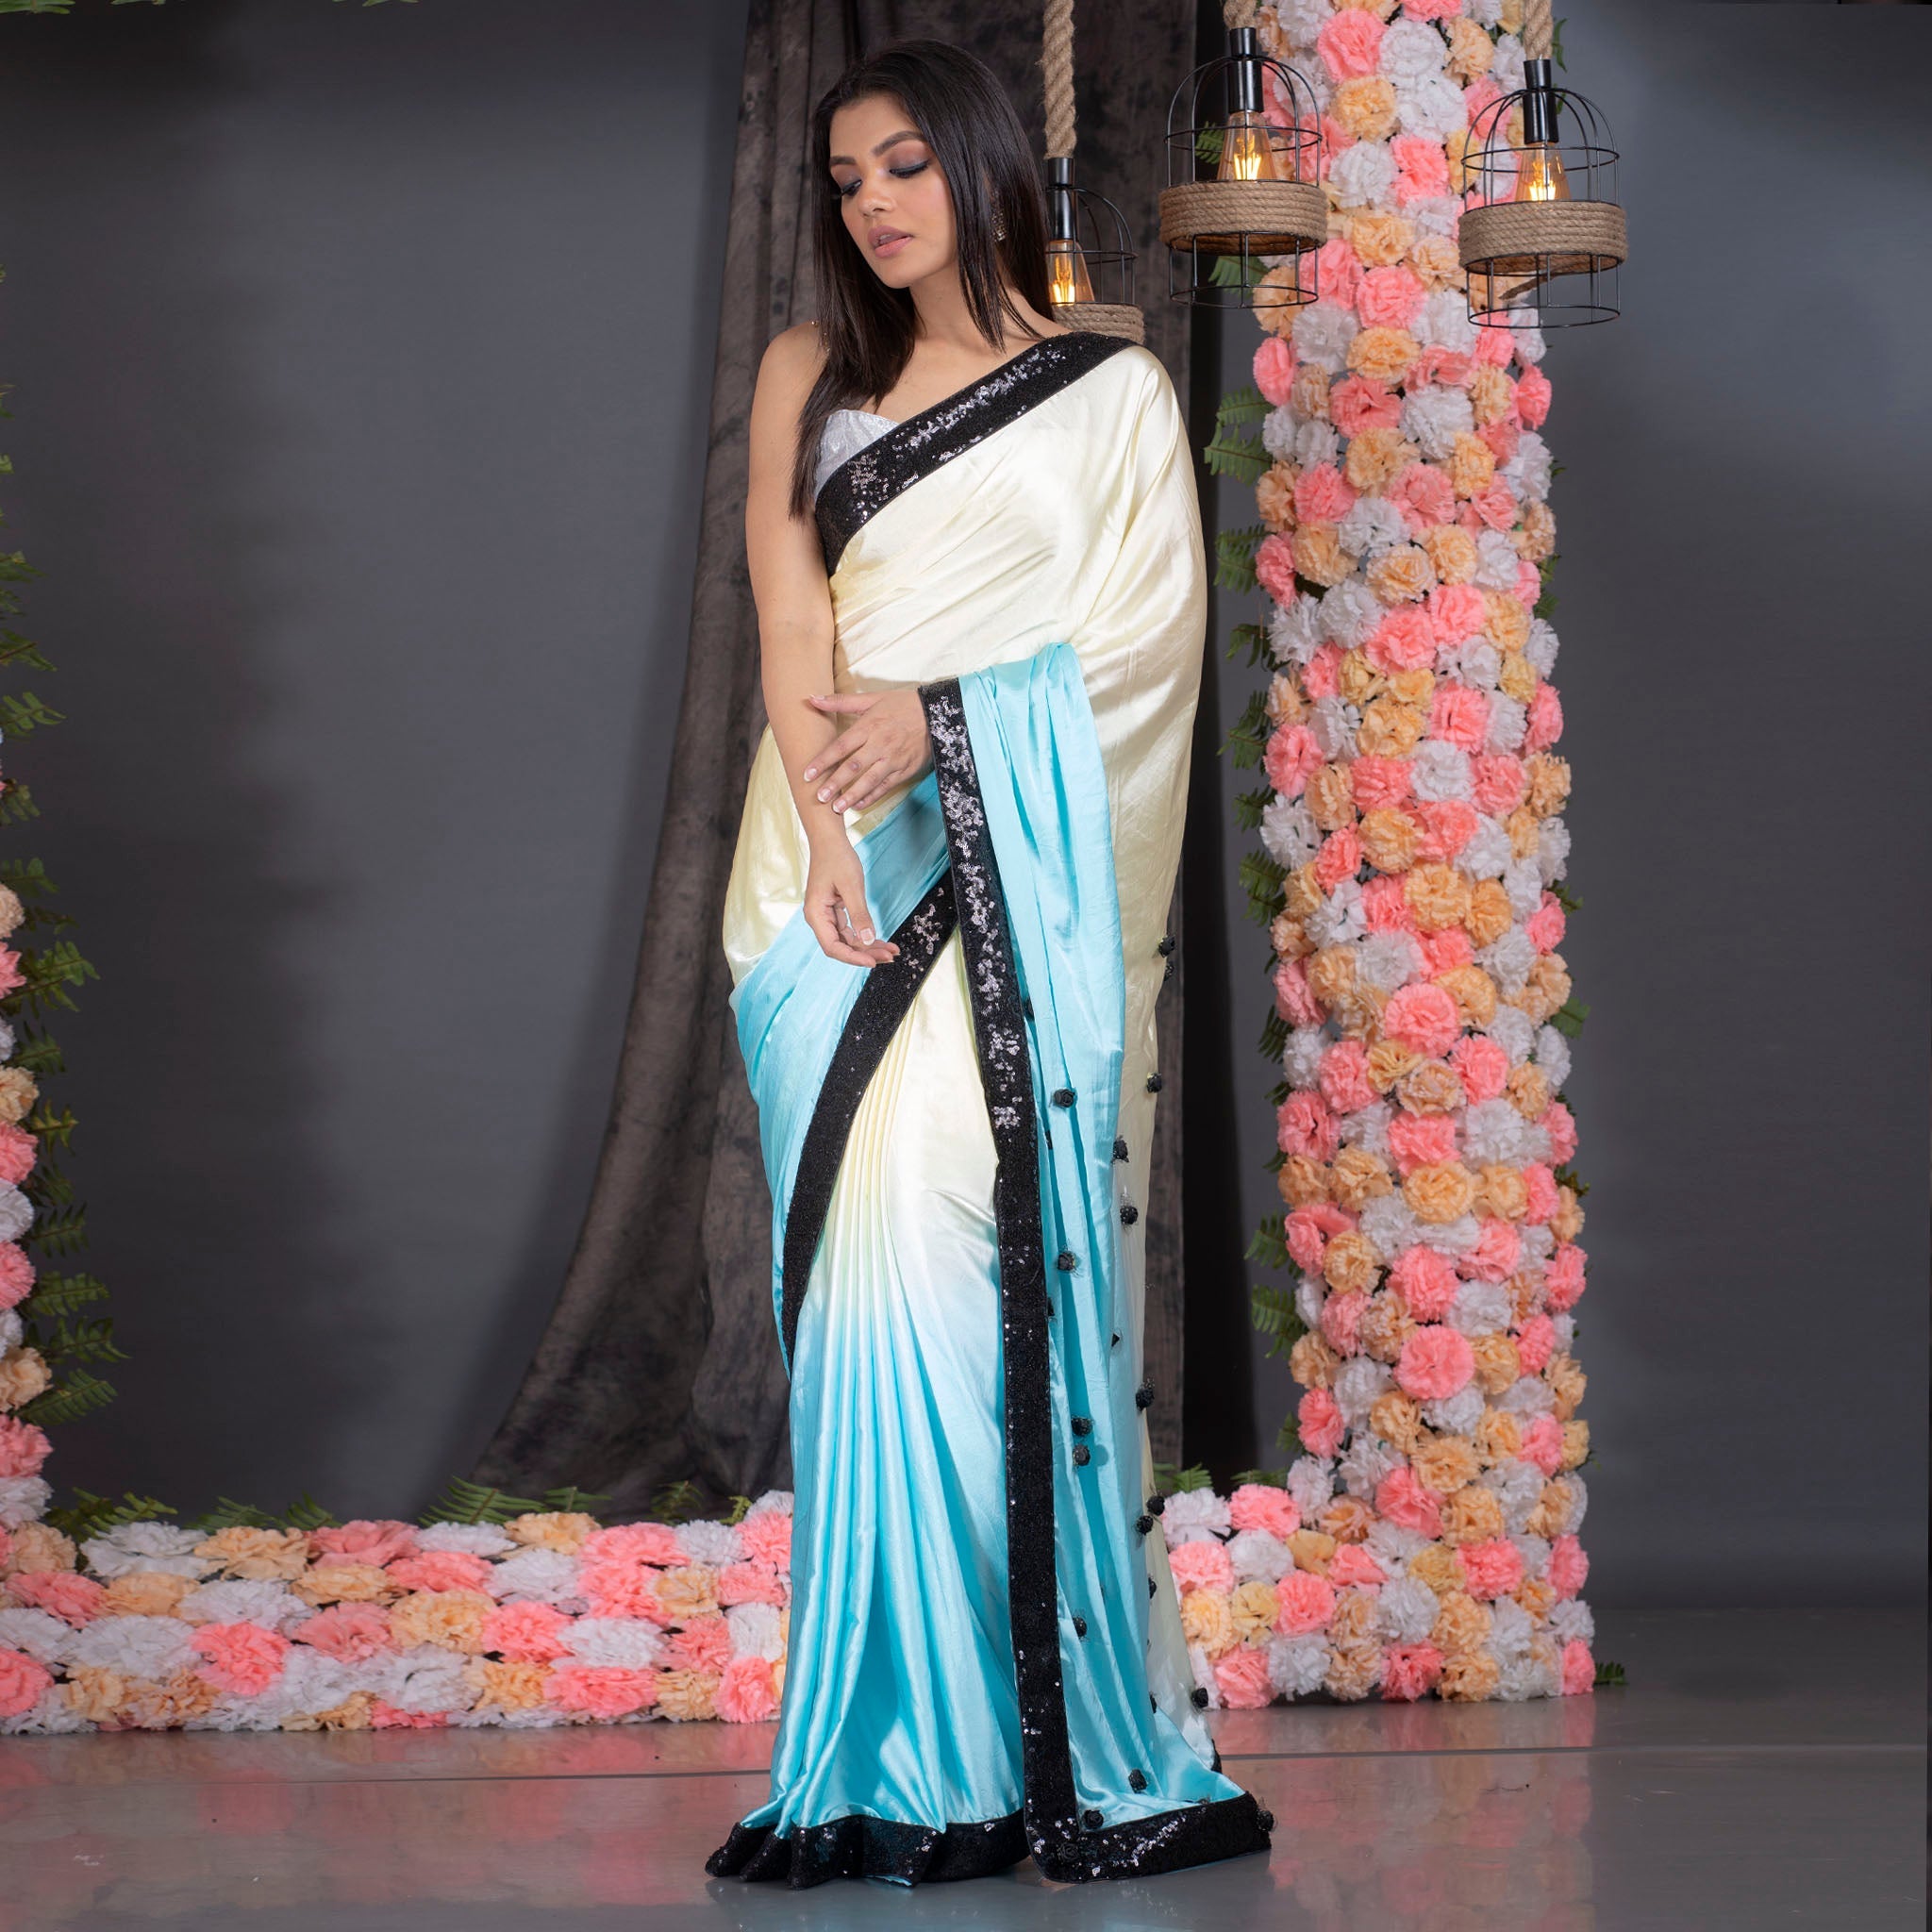 Women's Lime Yellow And Aqua Blue Ombre Satin Saree With Sequin Lace Border And Handmade Rosette Pallu - Boveee